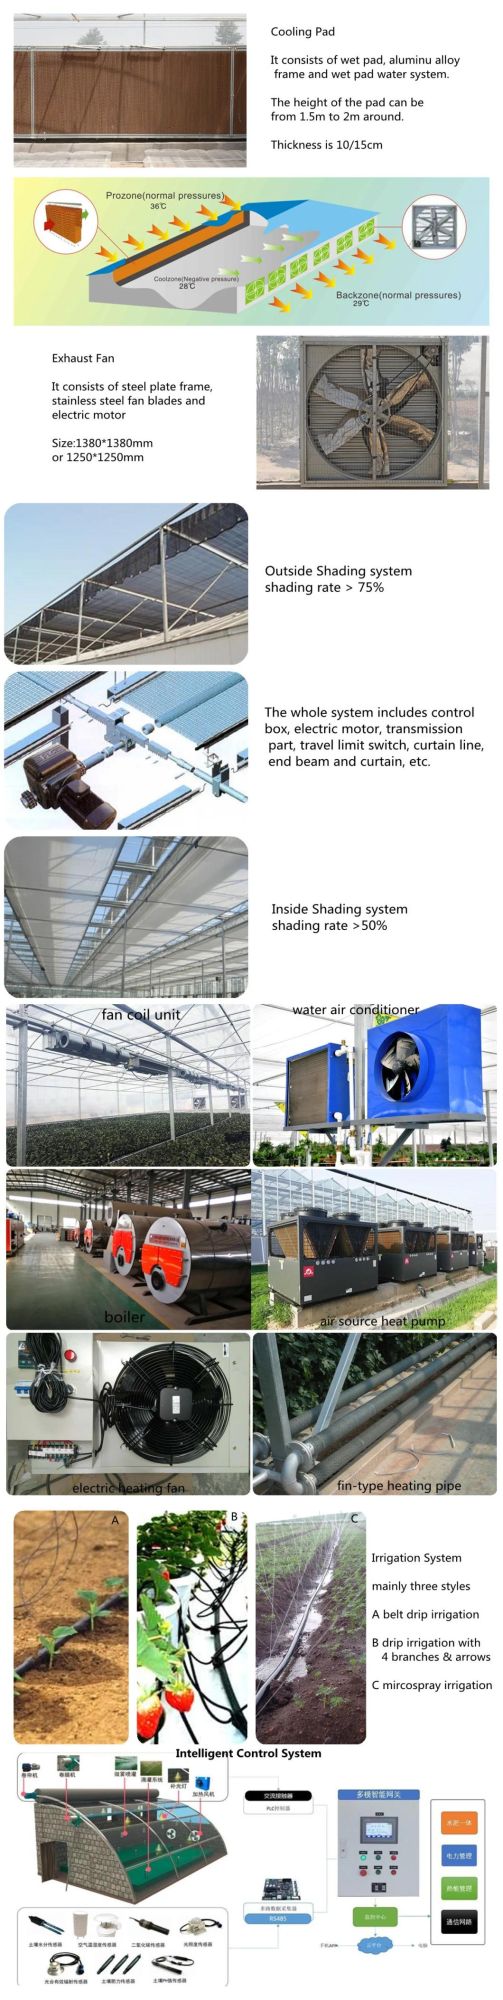 Sowing Machine Integrated Seedling Machine for Tray Seeds Dibbling/Sowing/Soil Covering for Modern Agriculture